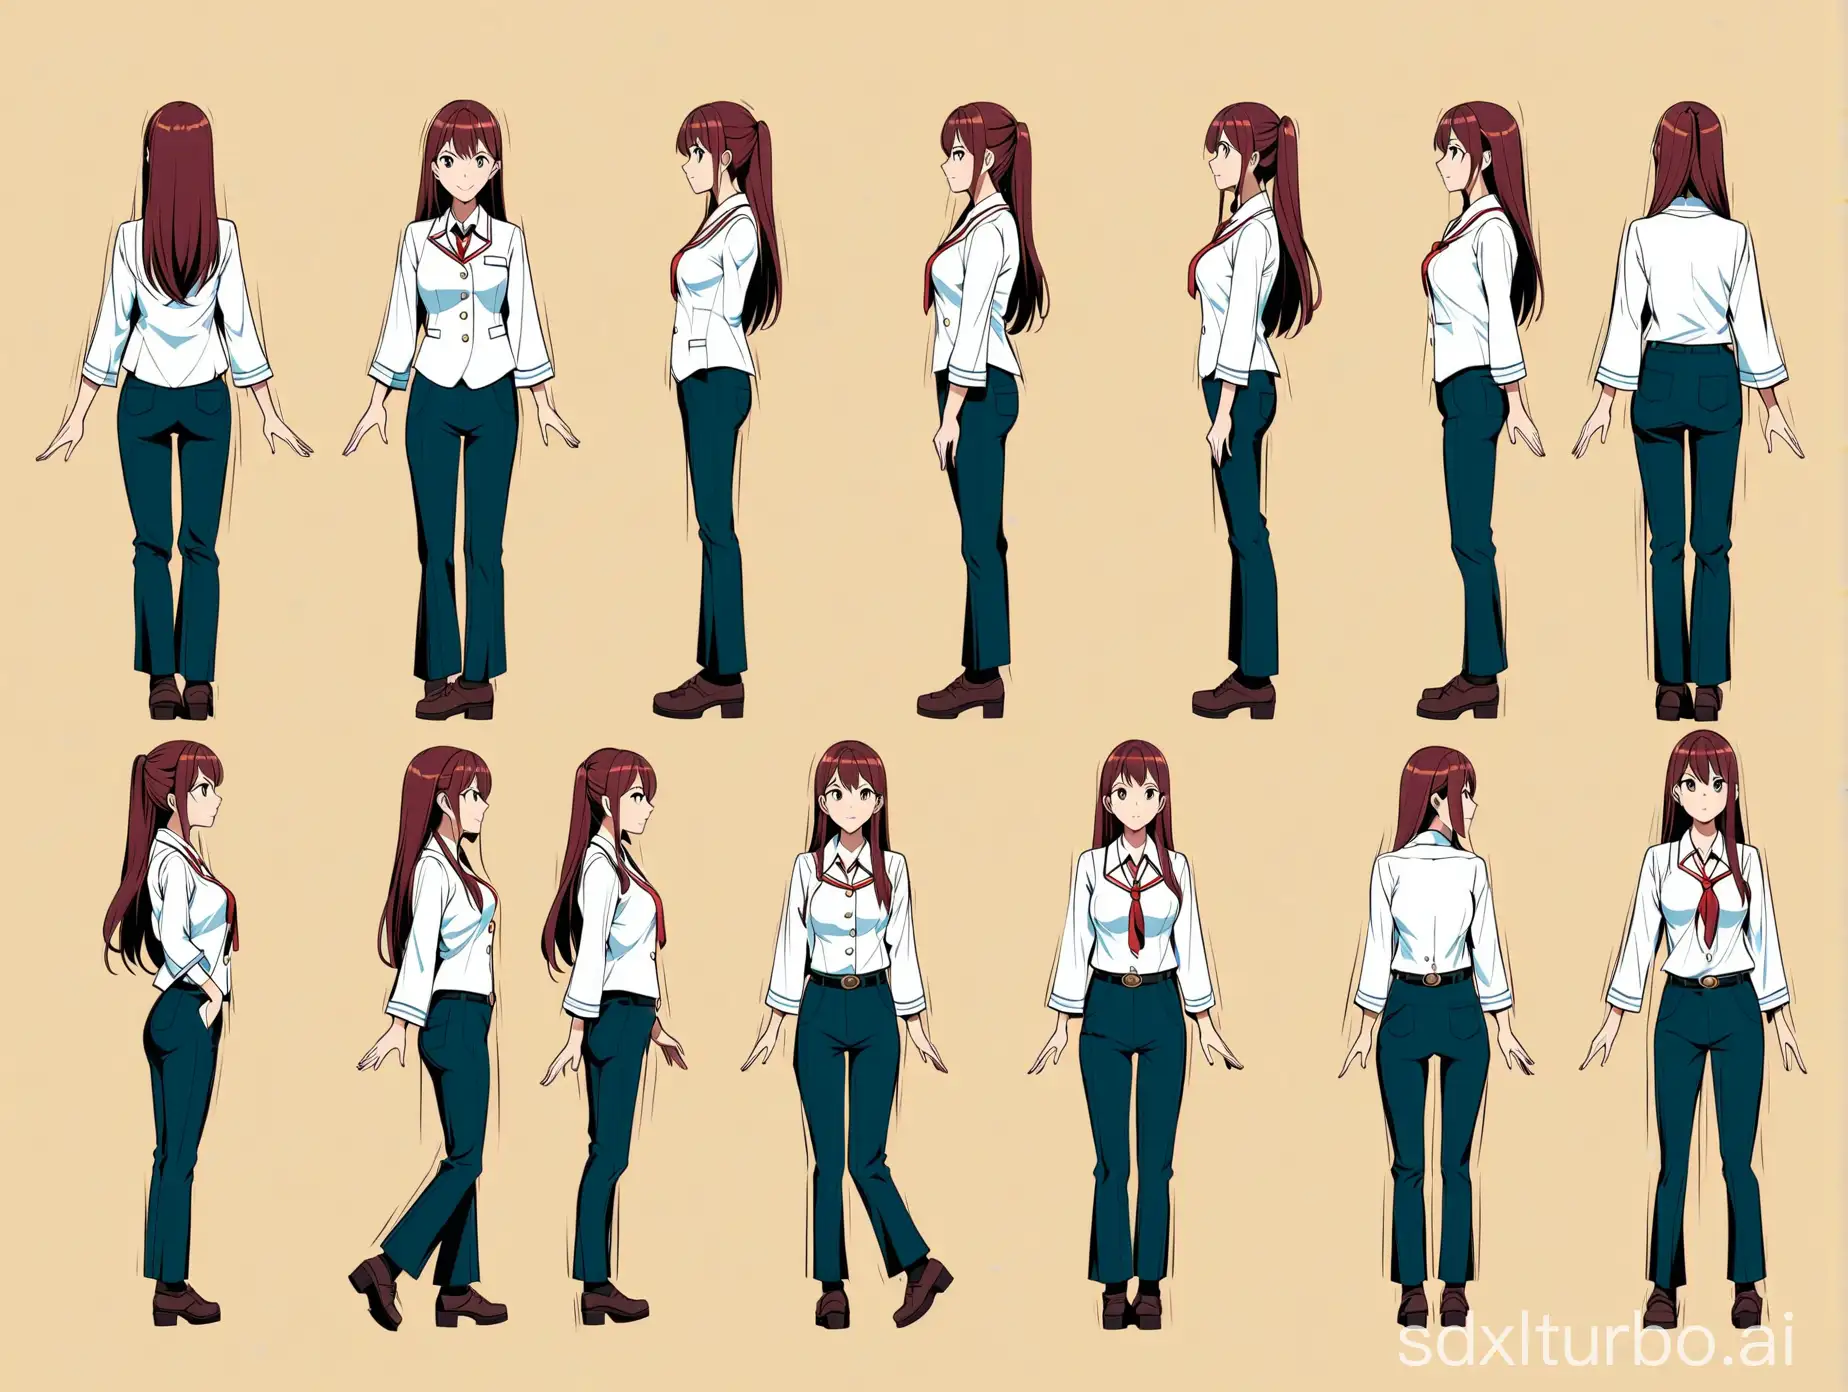 Freshly-Graduated-Female-College-Student-in-Manga-Style-Character-Sheet-with-6-Action-Poses